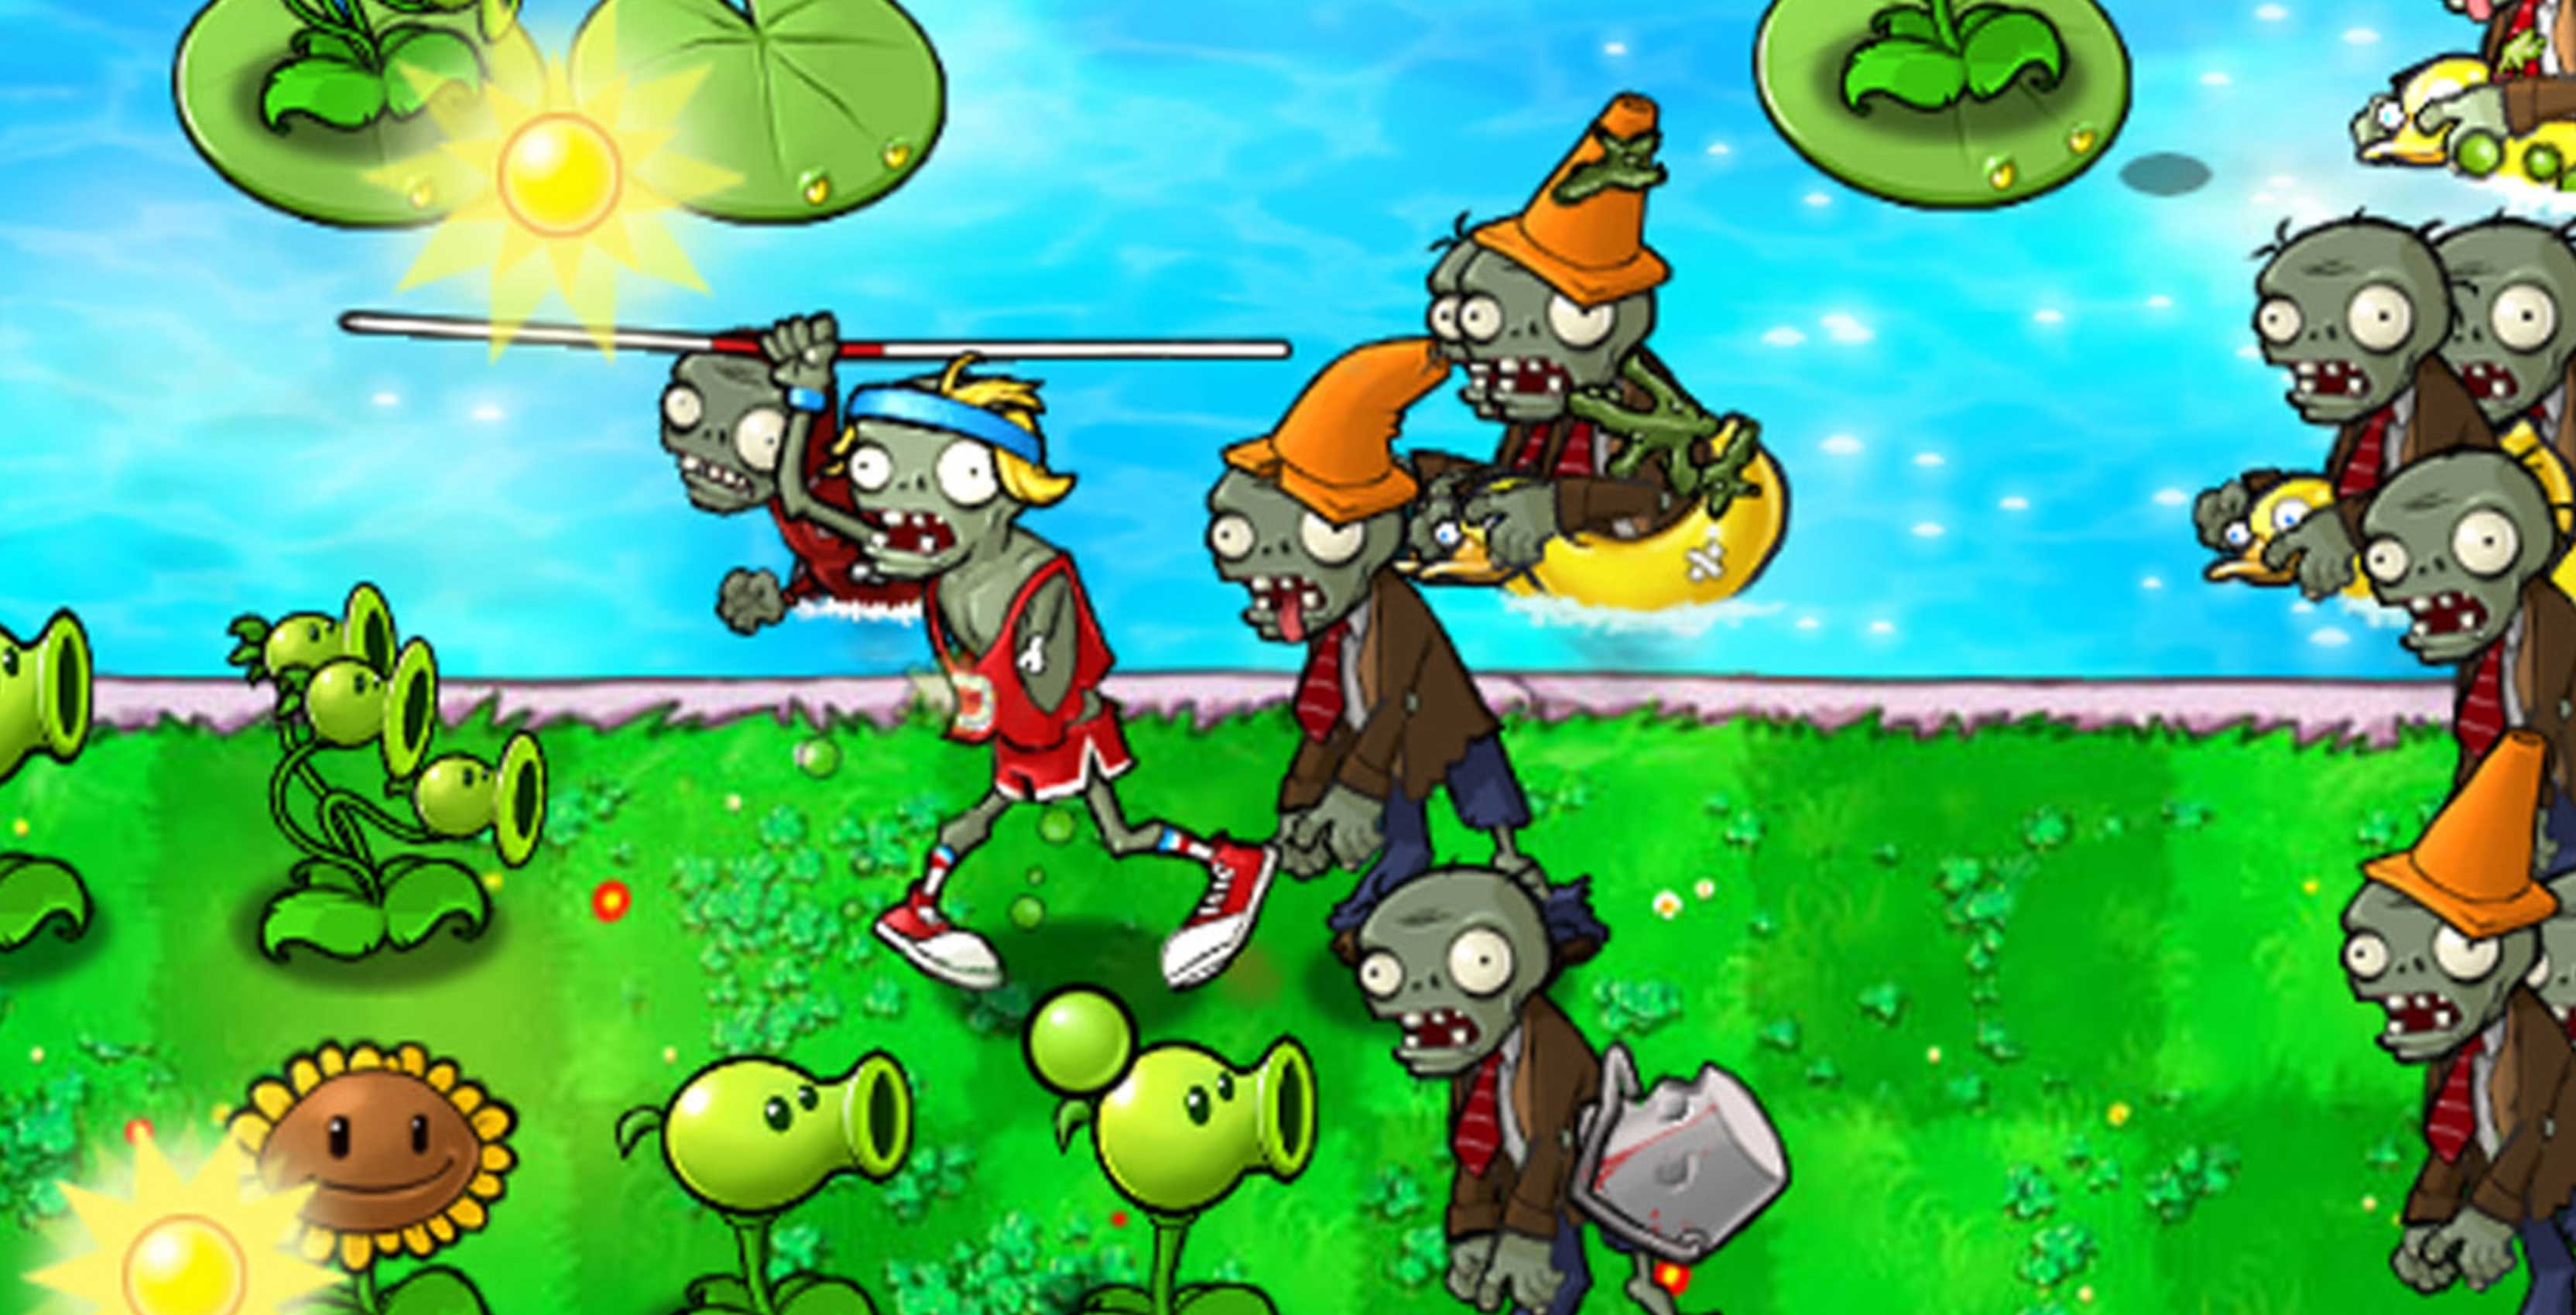 EA announces Plants vs Zombies 3, pre-alpha available now on Android